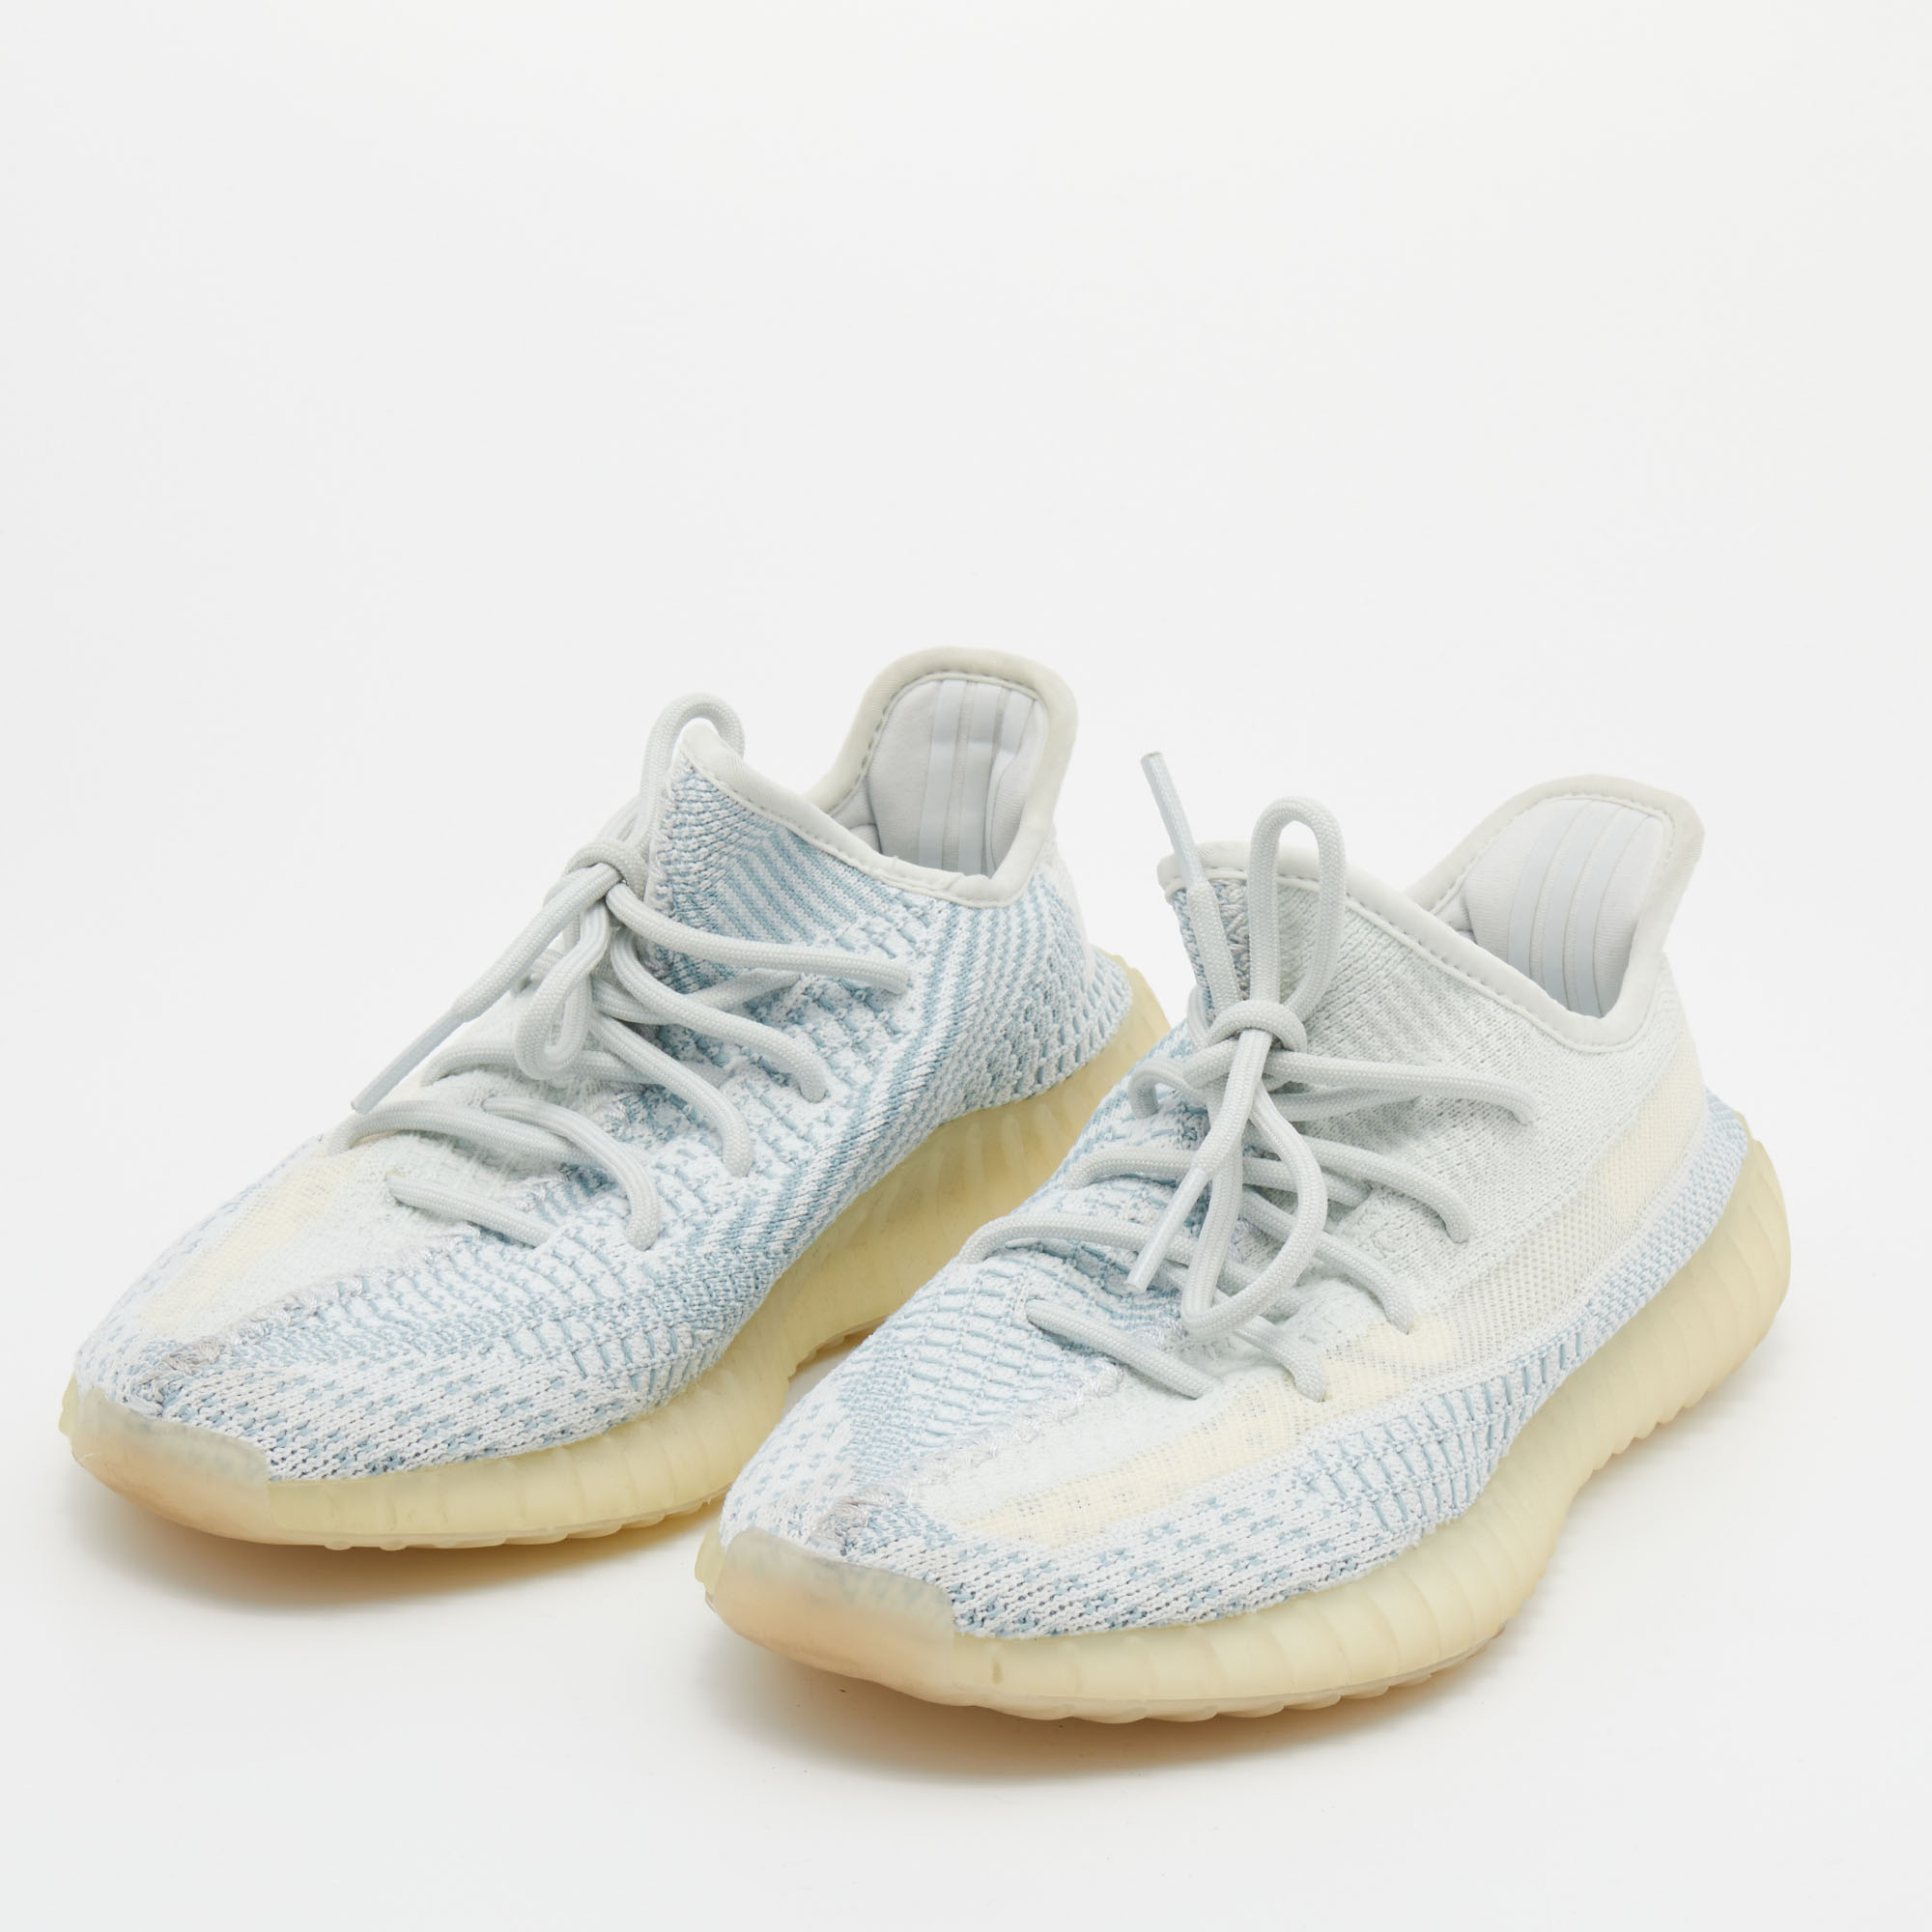 

Yeezy x adidas White/Blue Knit Fabric Boost 350 V2 Cloud White Sneakers Size 40 2/3